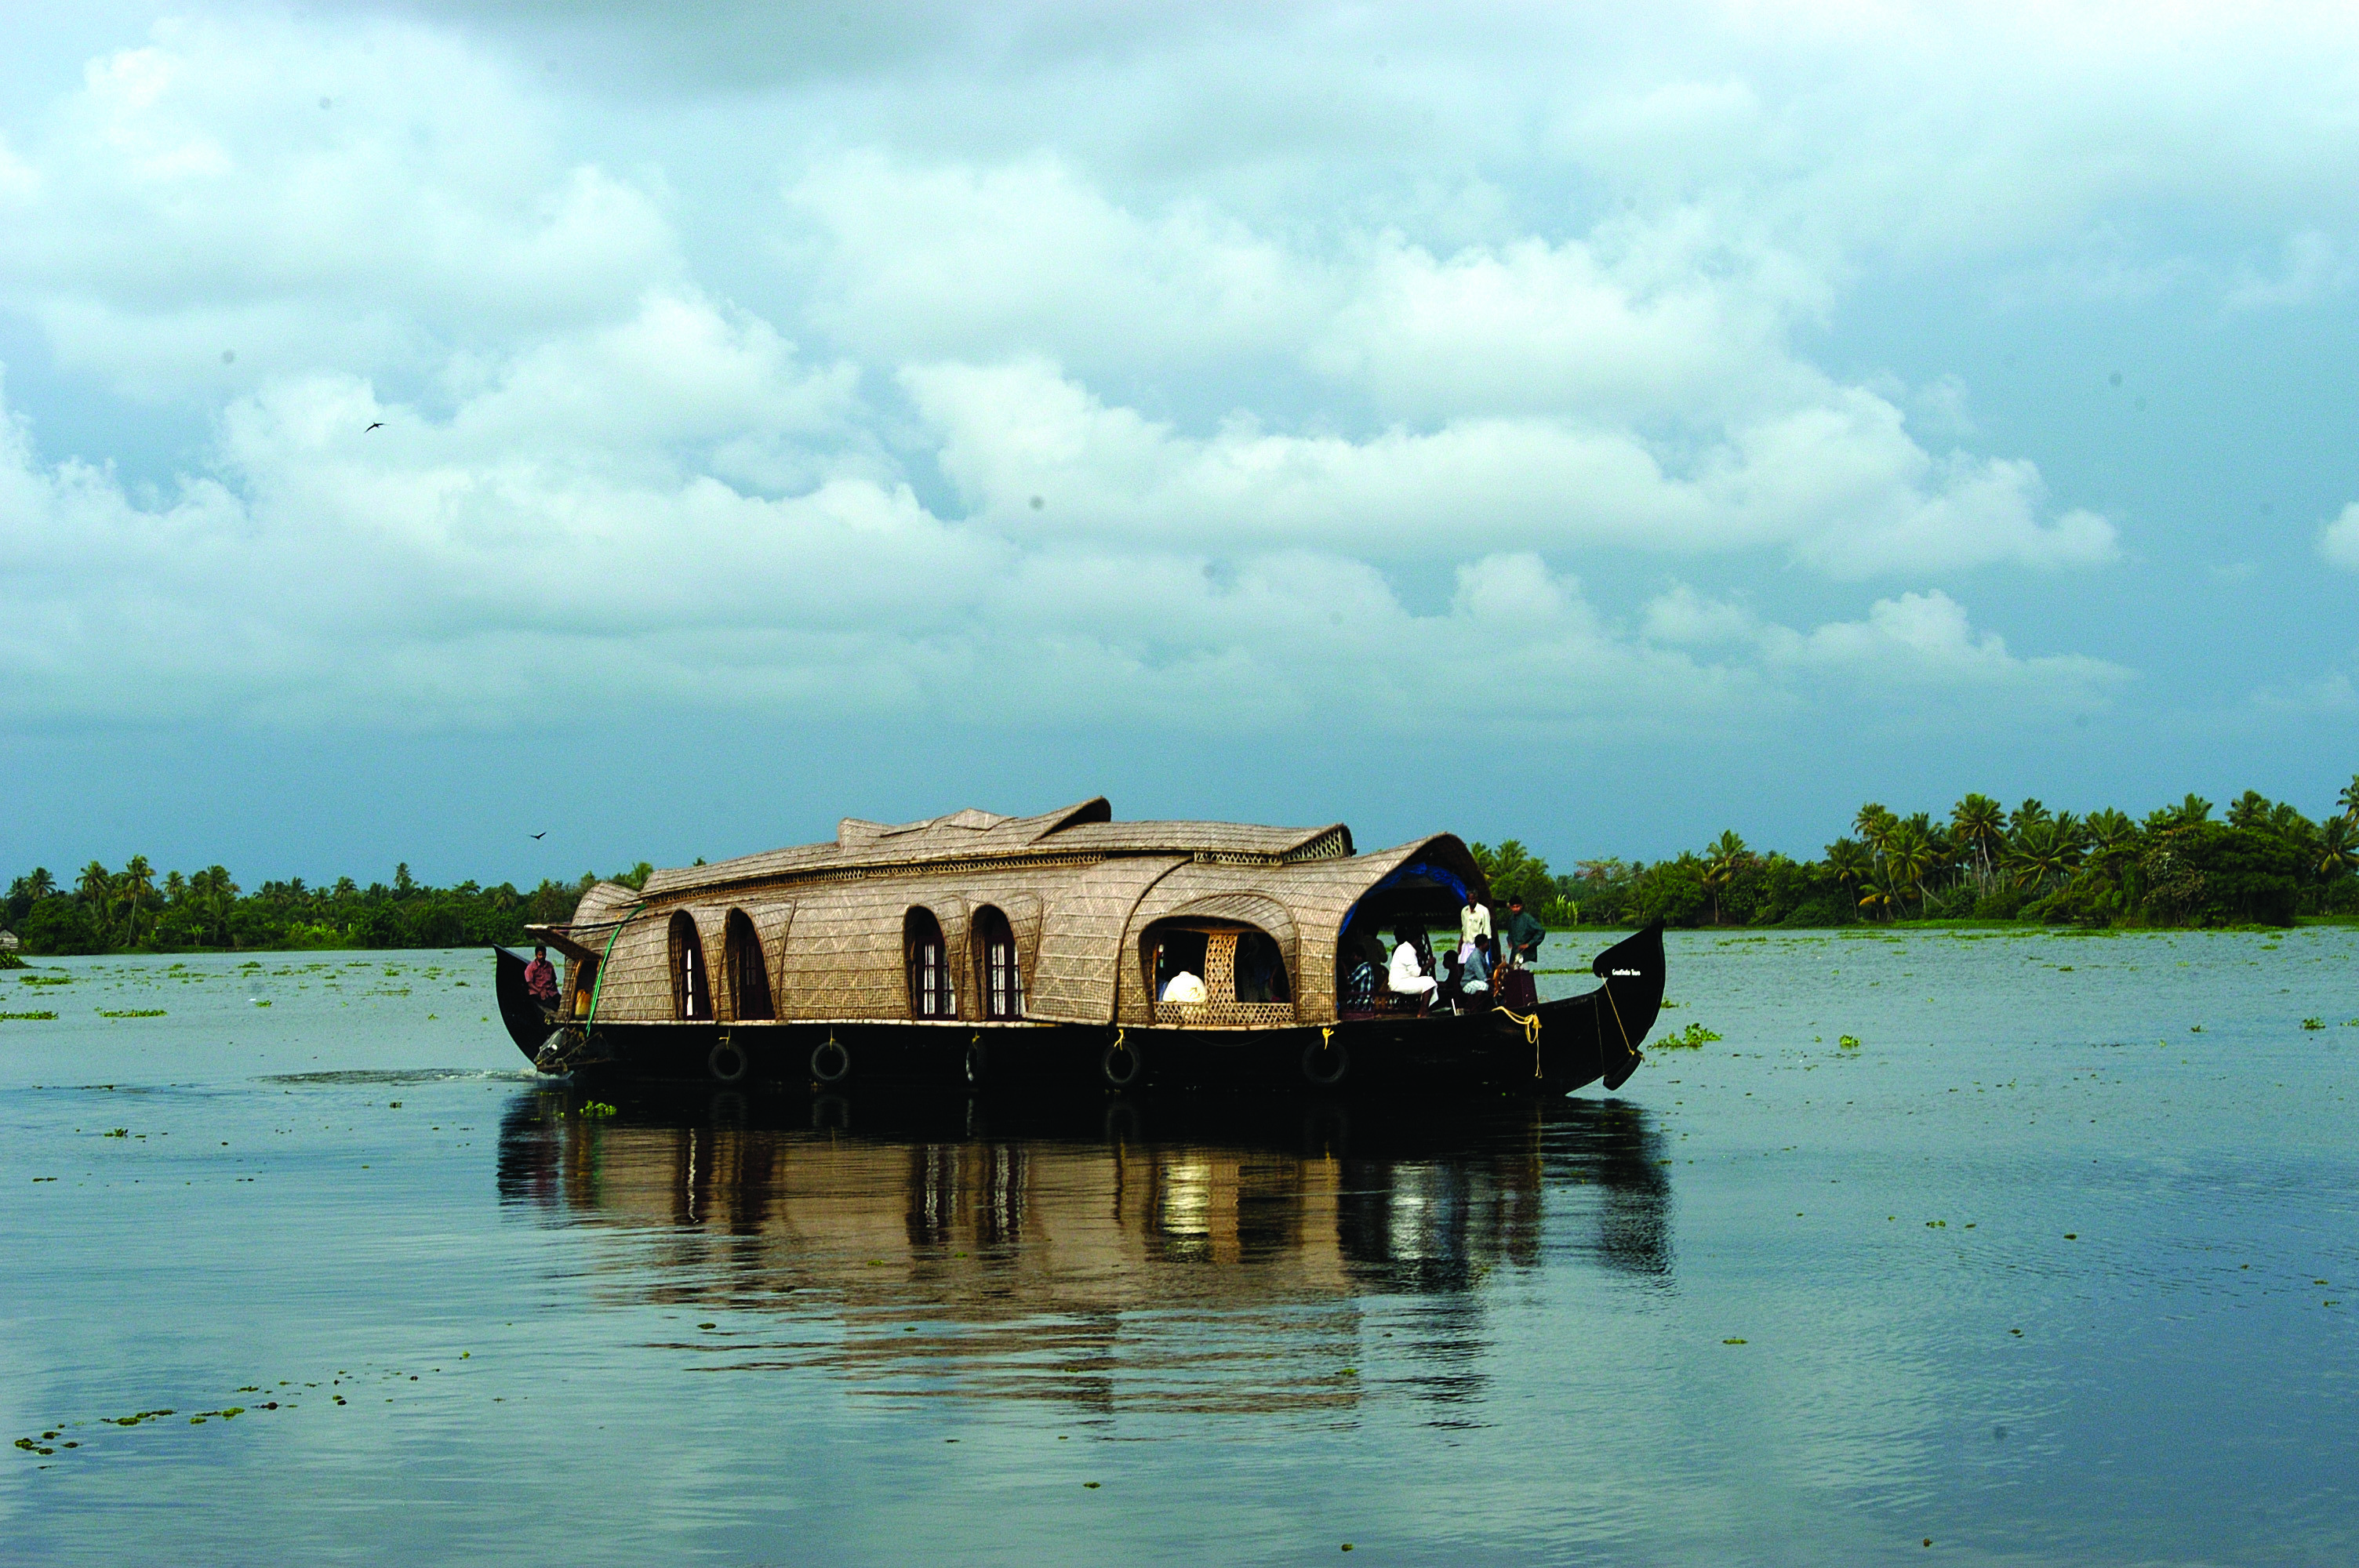 Houseboat In The Backwaters Of Kerala 3008x2000